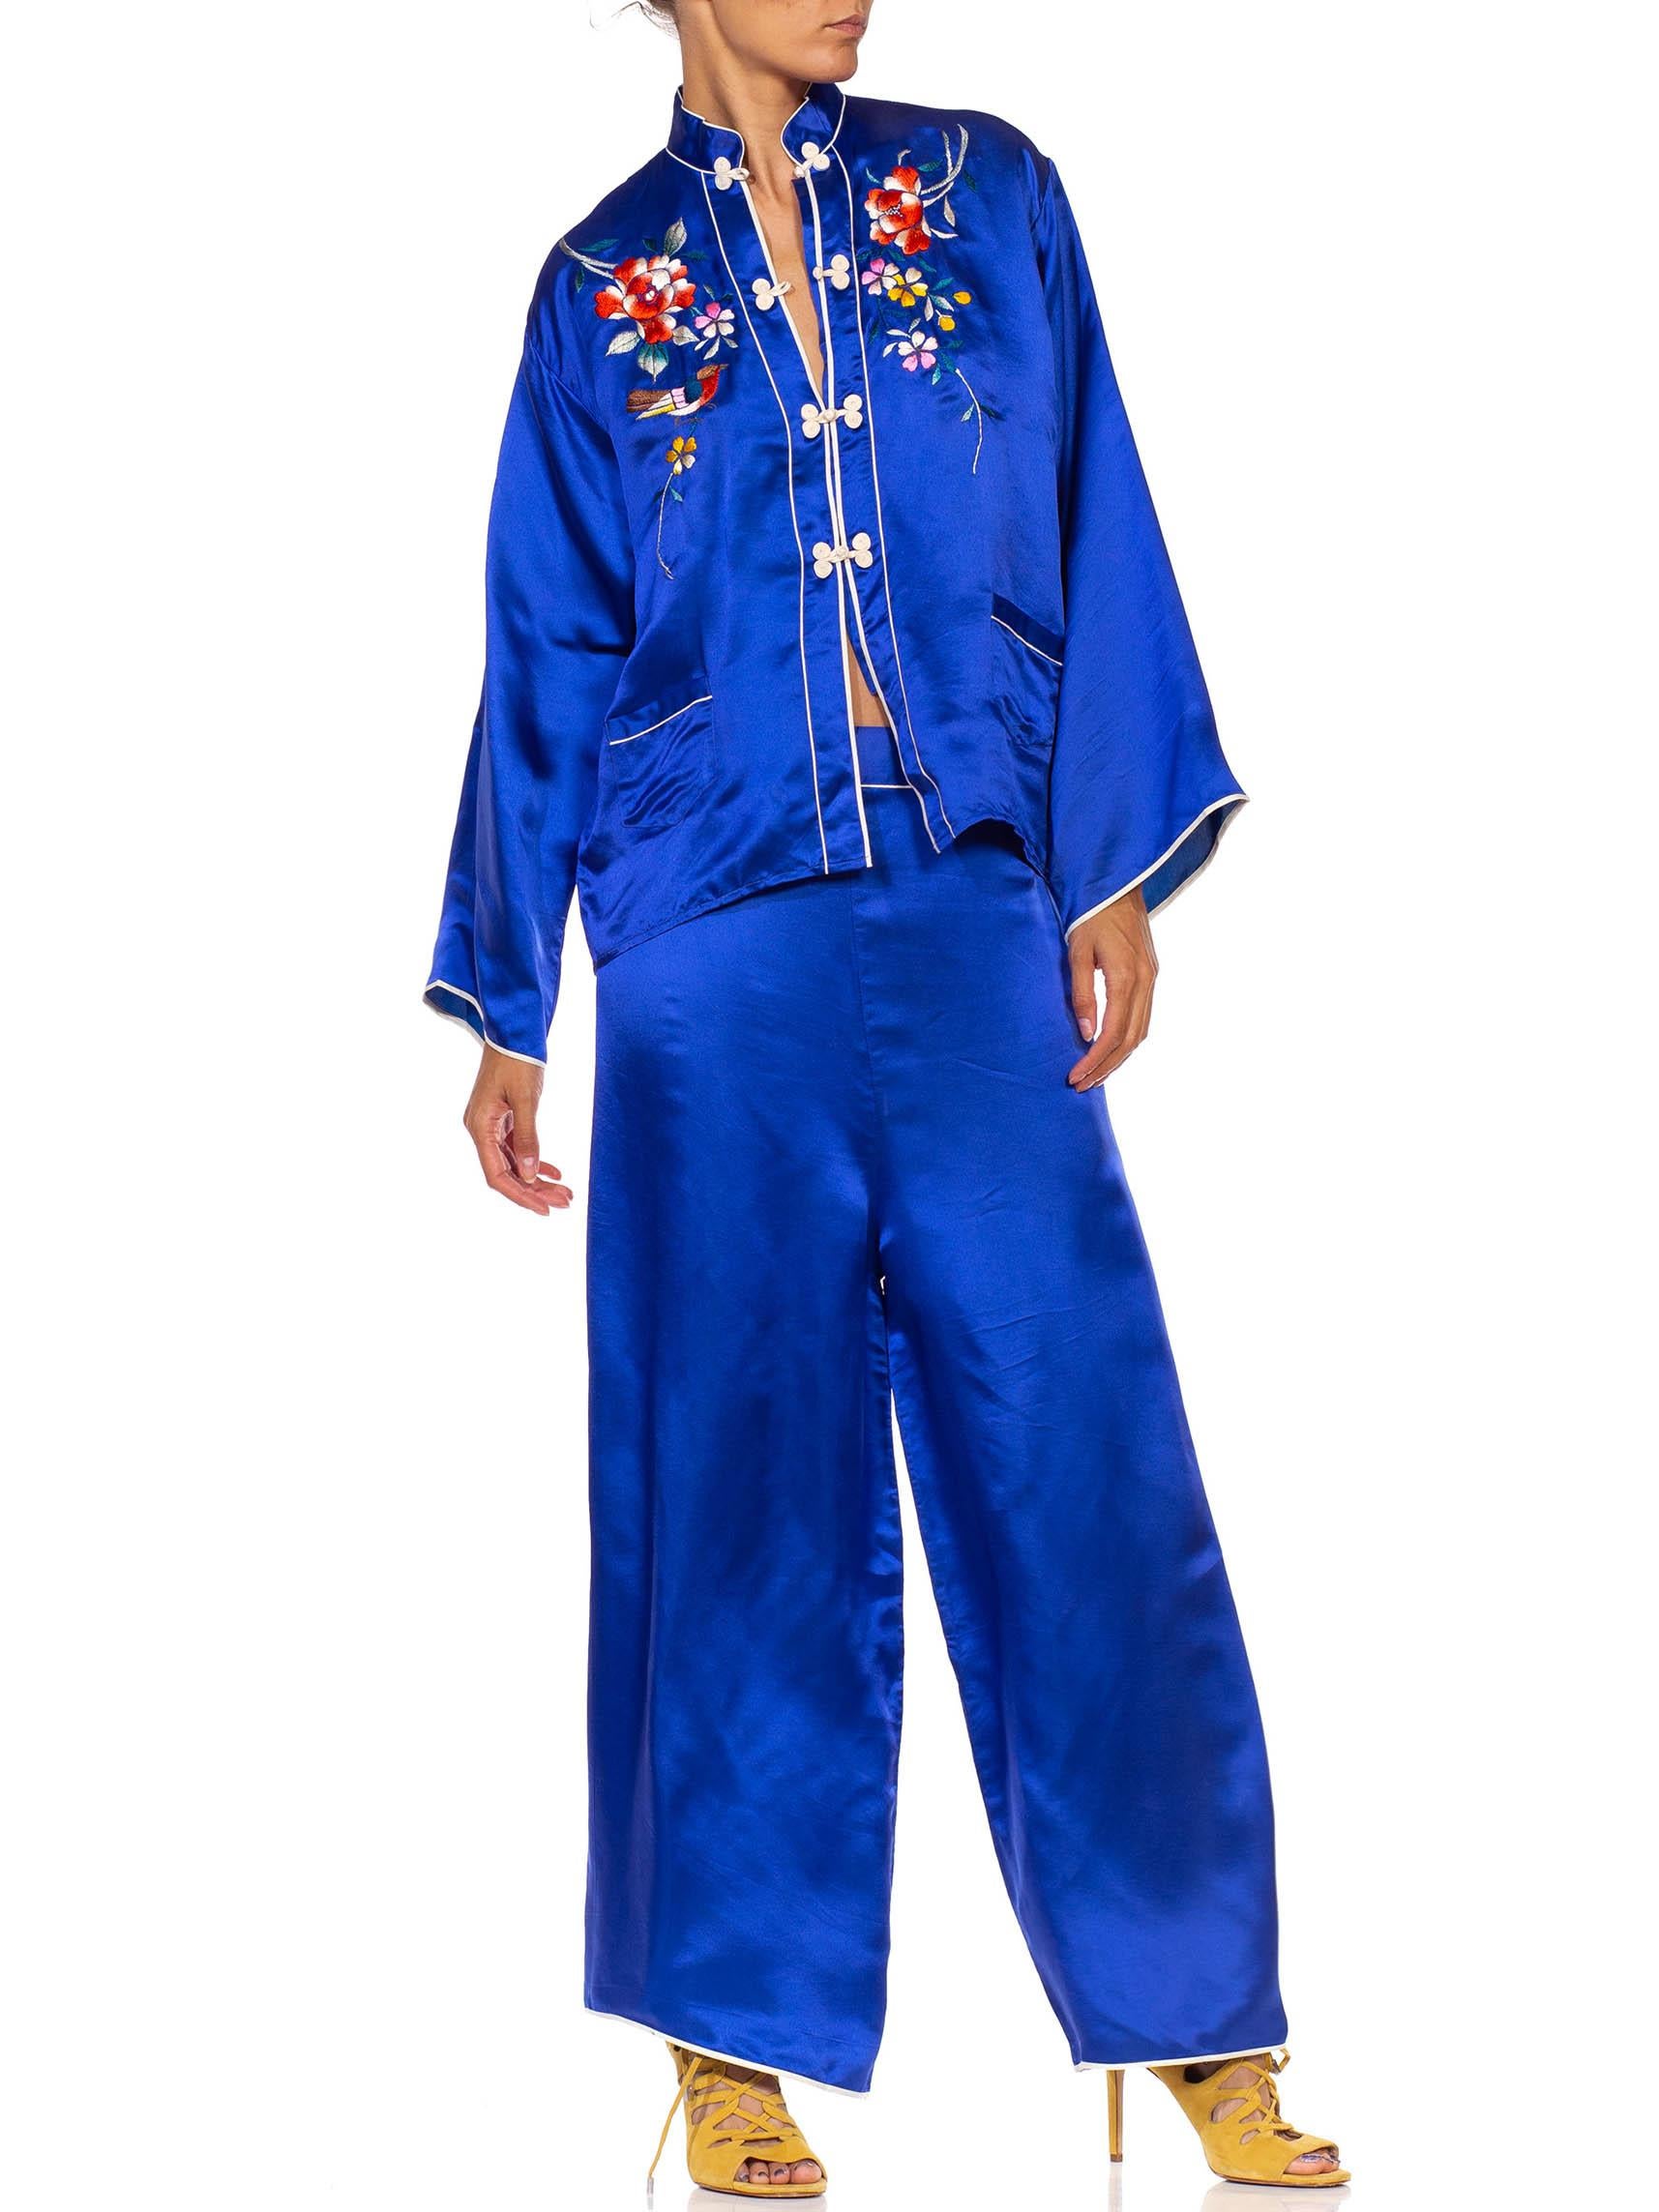 Women's 1970S Indigo Blue Silk Japanese Pajamas Ensemble With Floral Embroidery For Sale